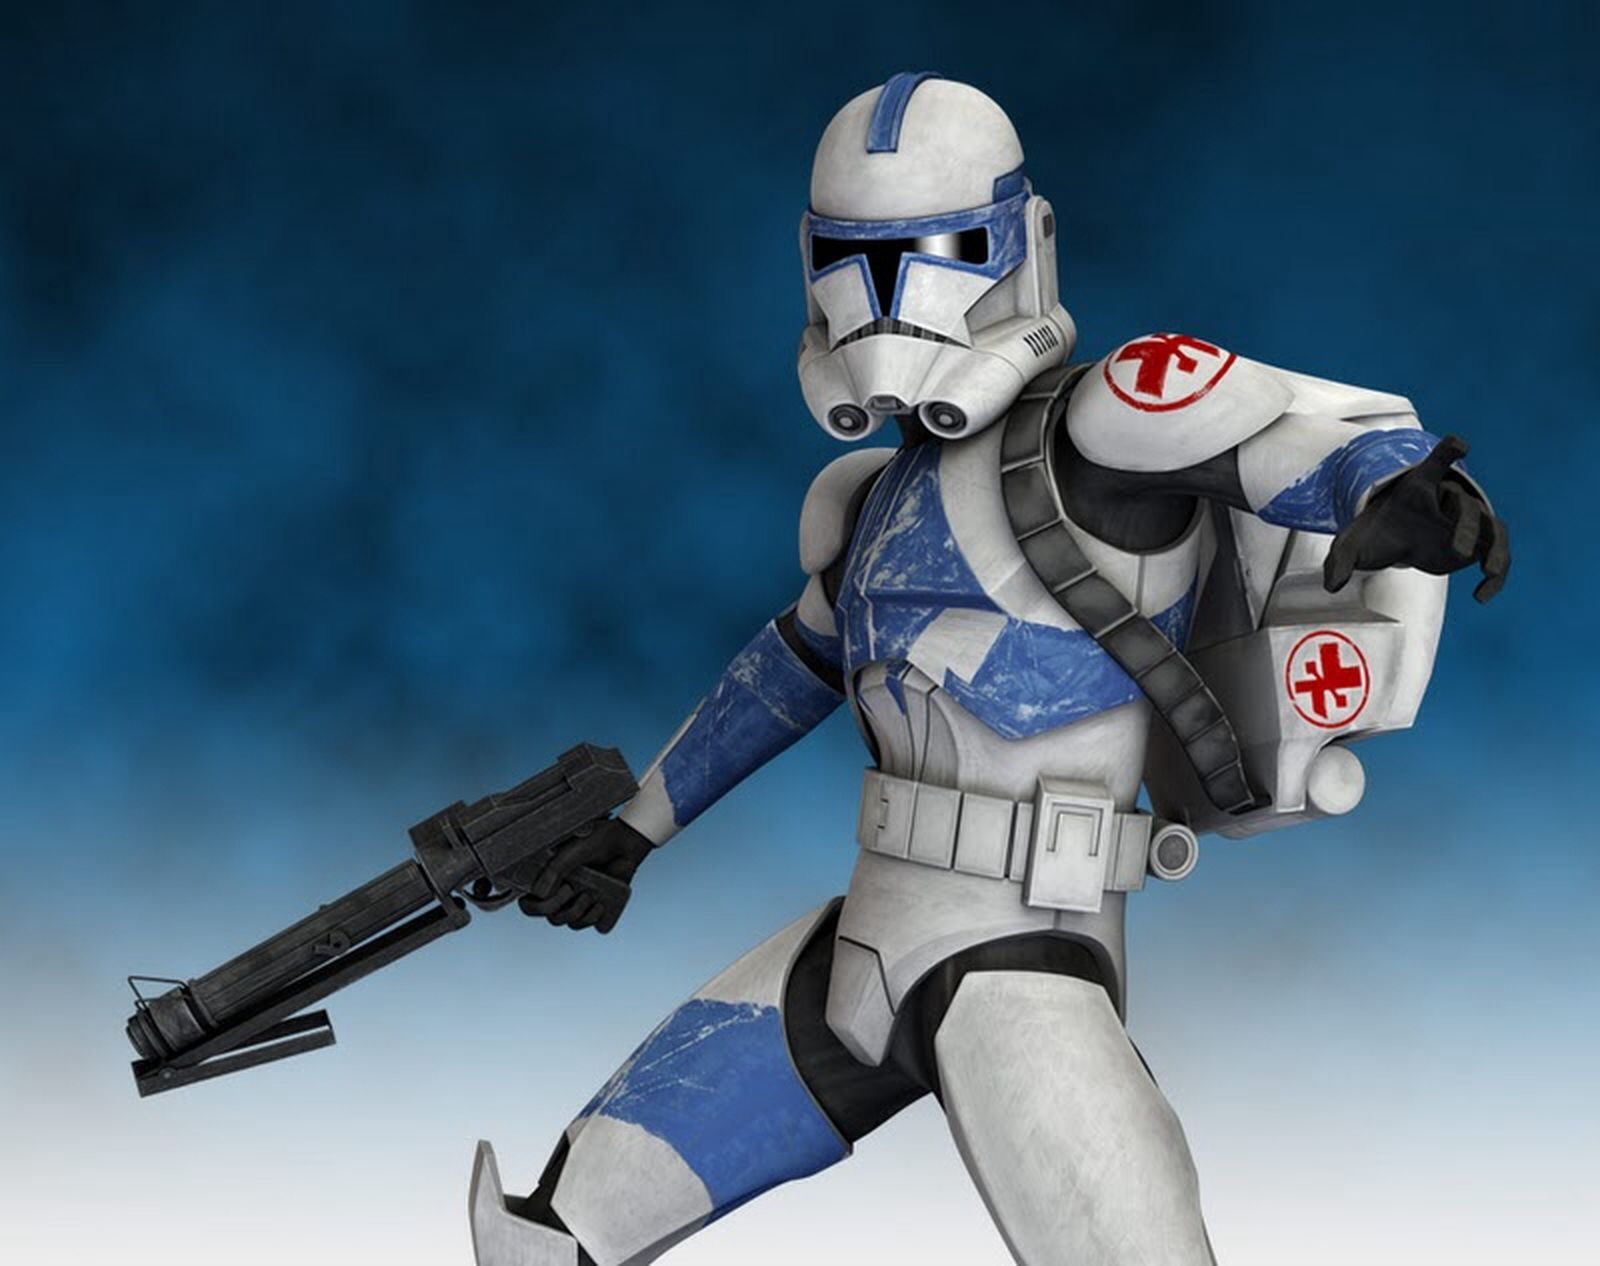 Kix is a clone trooper medic who served in the 501st Legion, a unit in the Galactic Republic's Grand Arm. Star wars picture, Star wars trooper, Star wars